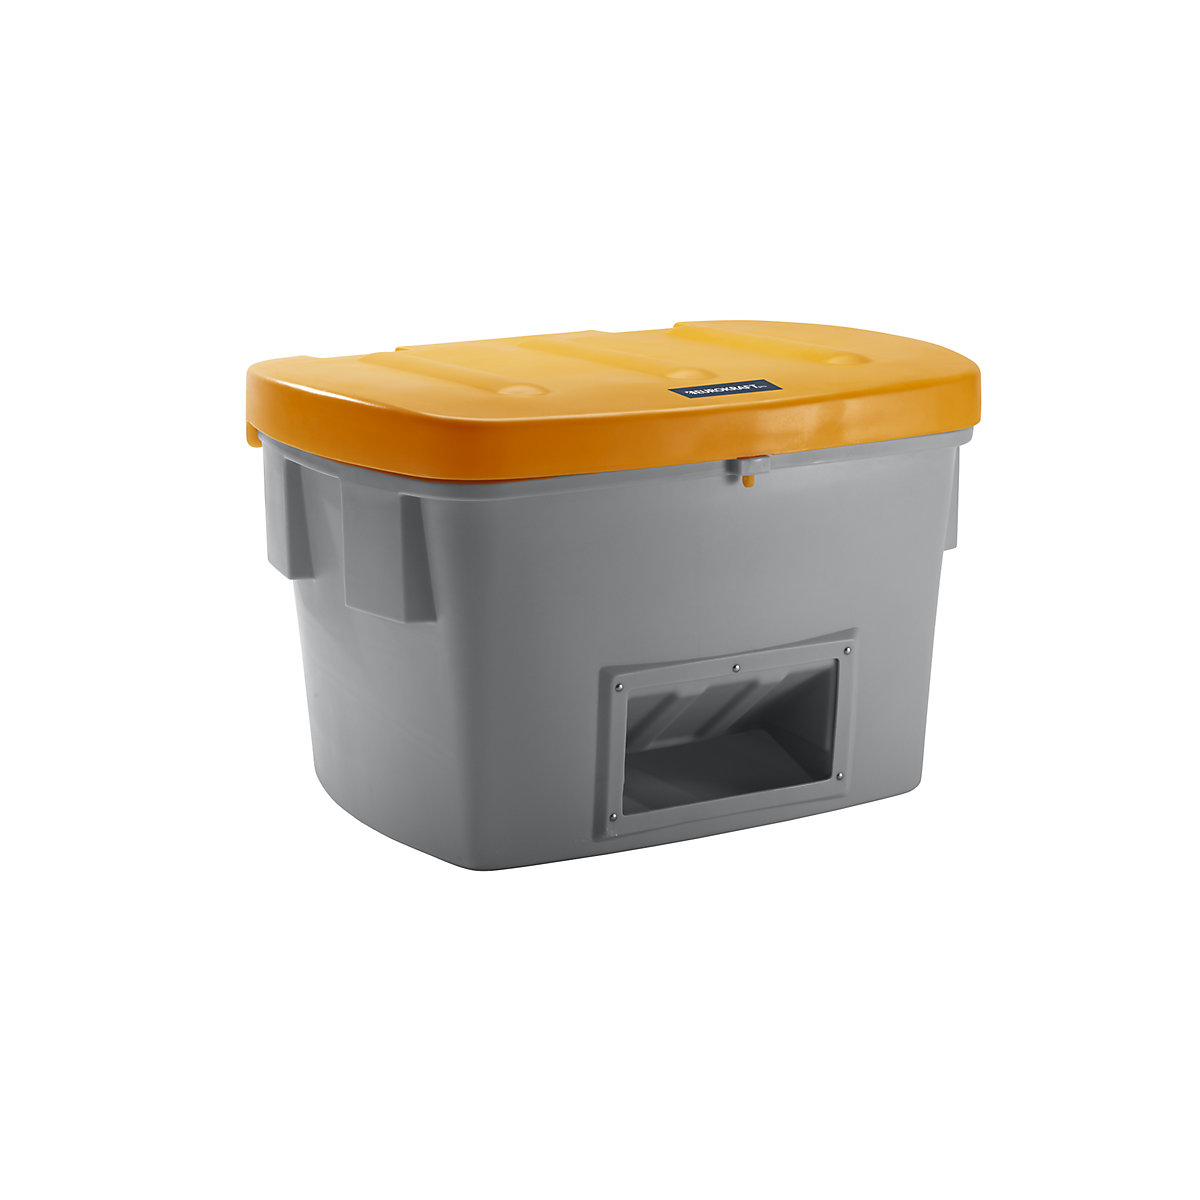 Universal / grit container – eurokraft pro, with dispenser opening, 700 l, orange lid-11